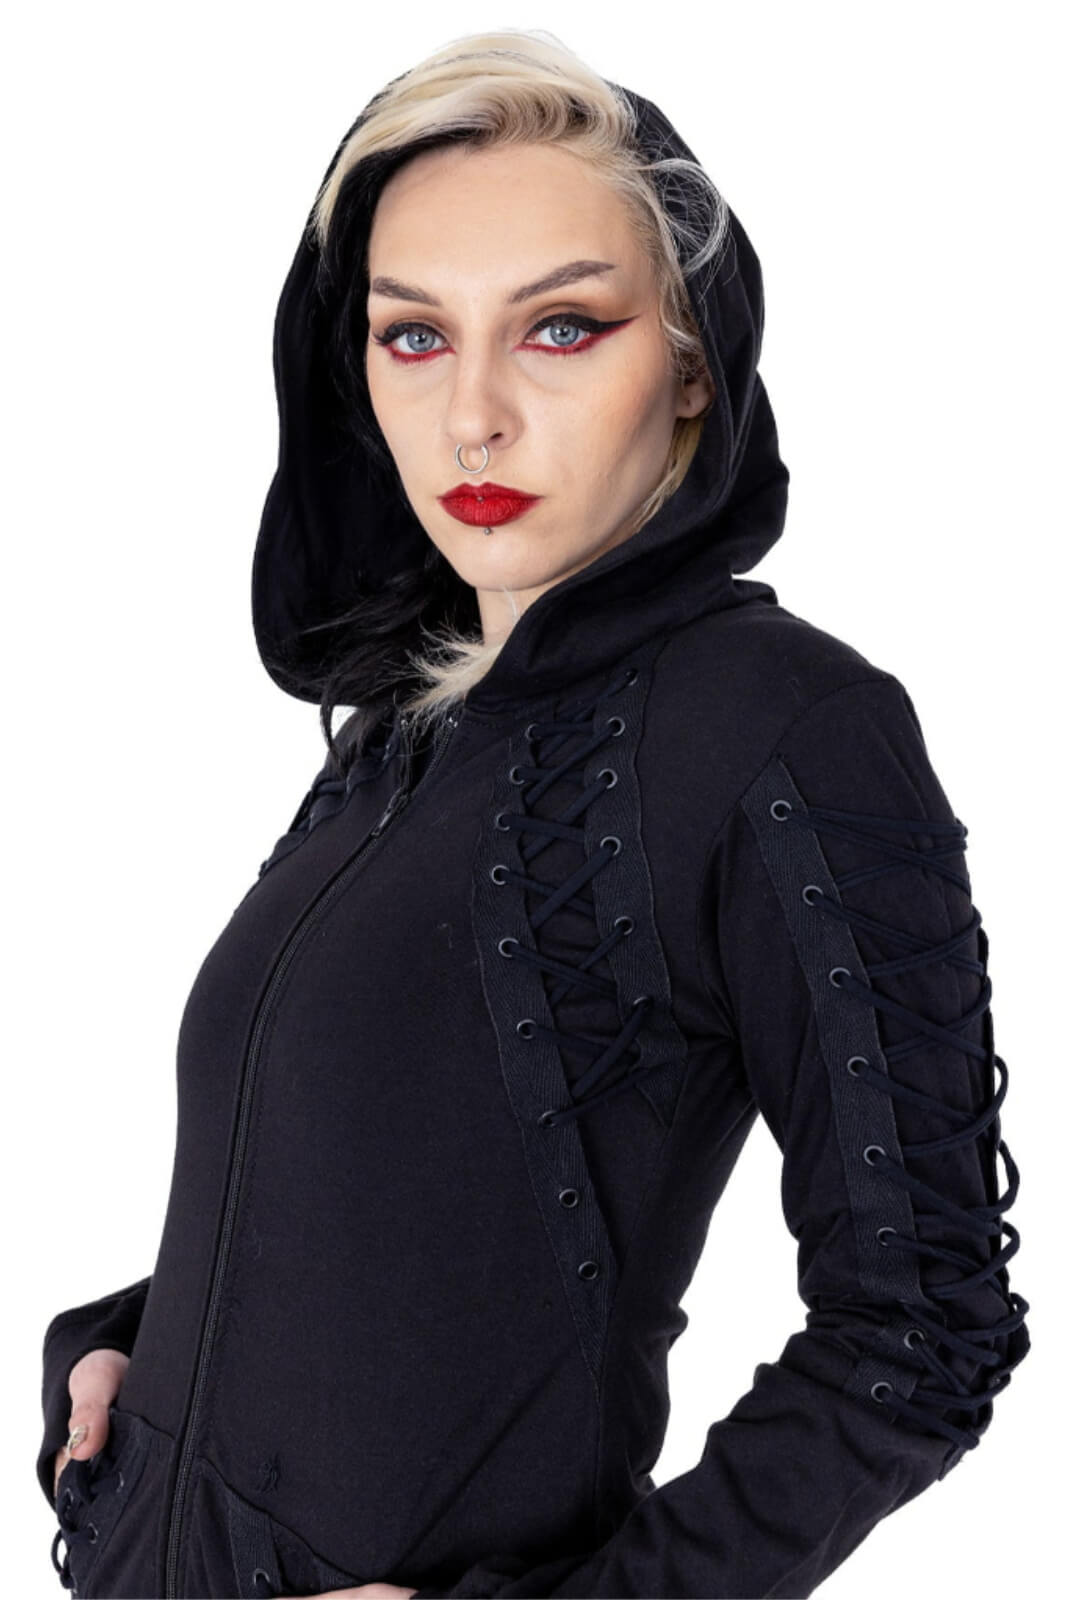 Poizen Industries Diana Hood Full Zip Lace-Up Gothic Jumper